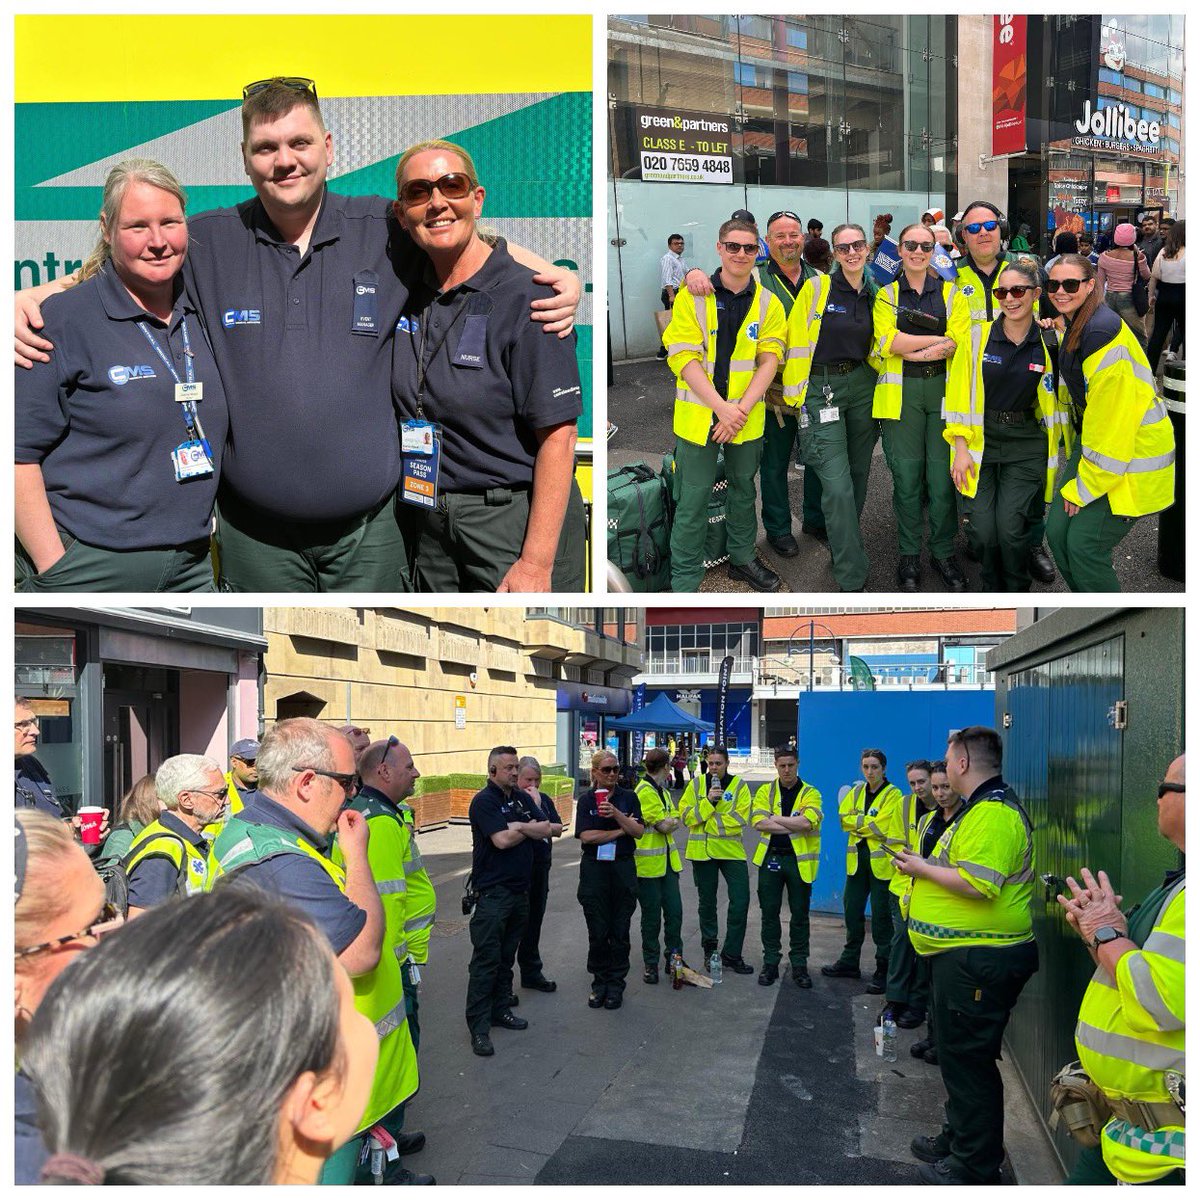 A fabulous weekend leading multi-disciplinary teams from @medical_central in the Leicester Football Game and Trophy Parade 🏆 #medicalcover #eventmanager #ambulance #iimarchbriefing #lcfc